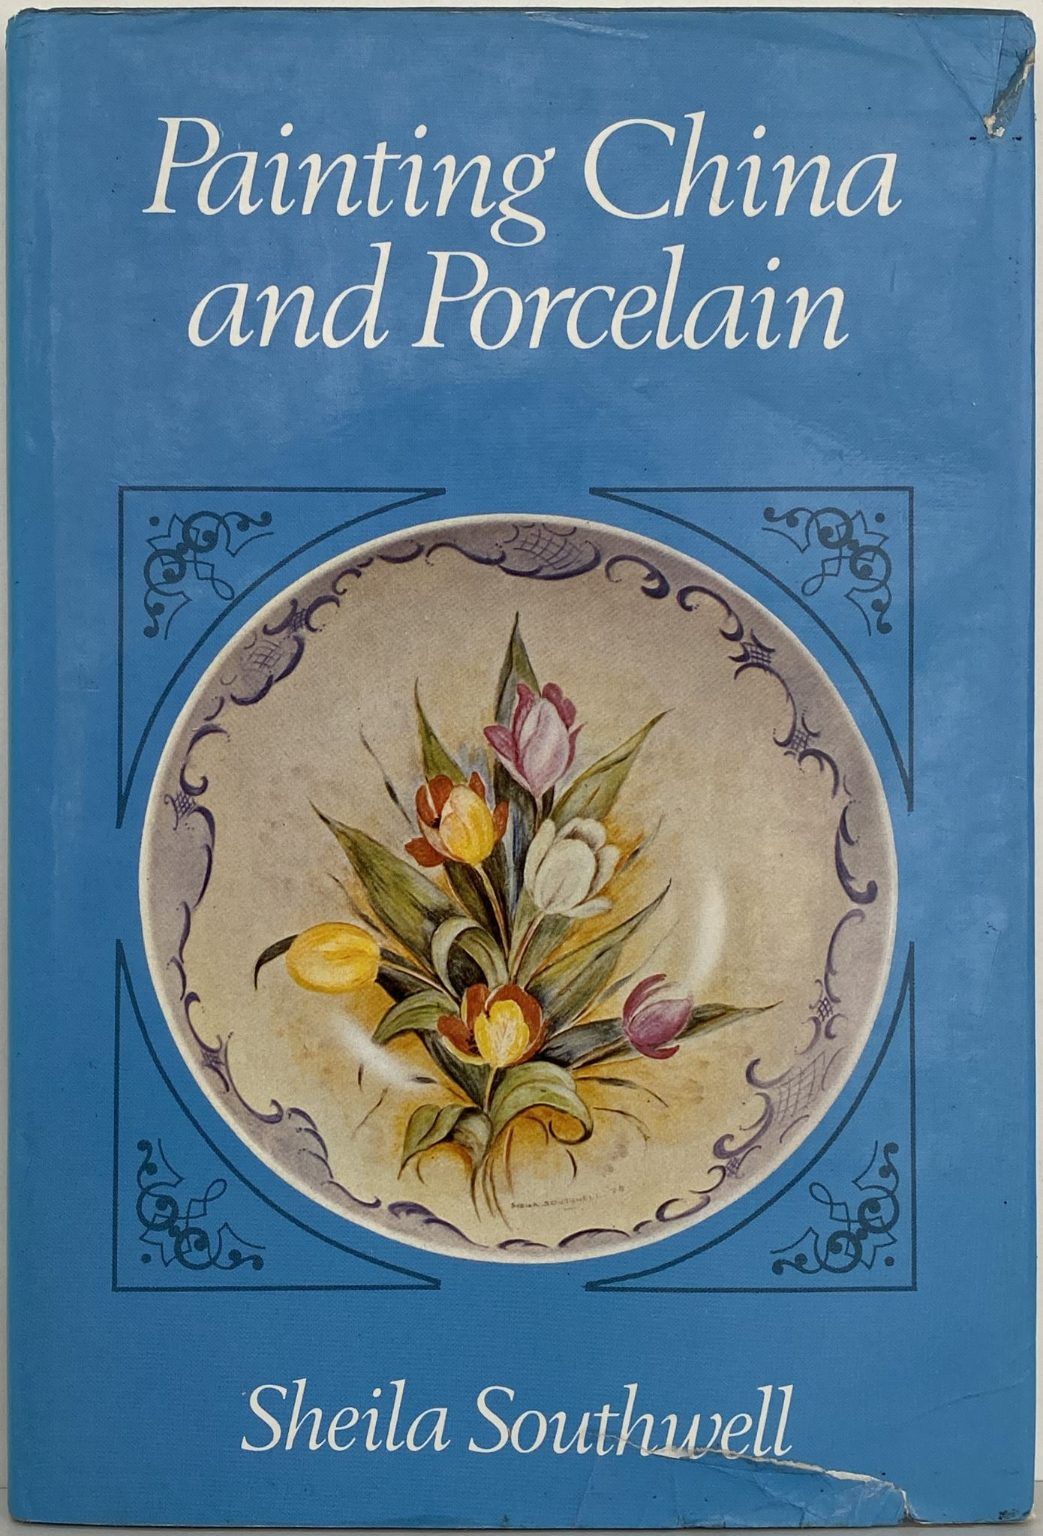 PAINTING CHINA AND PORCELAIN